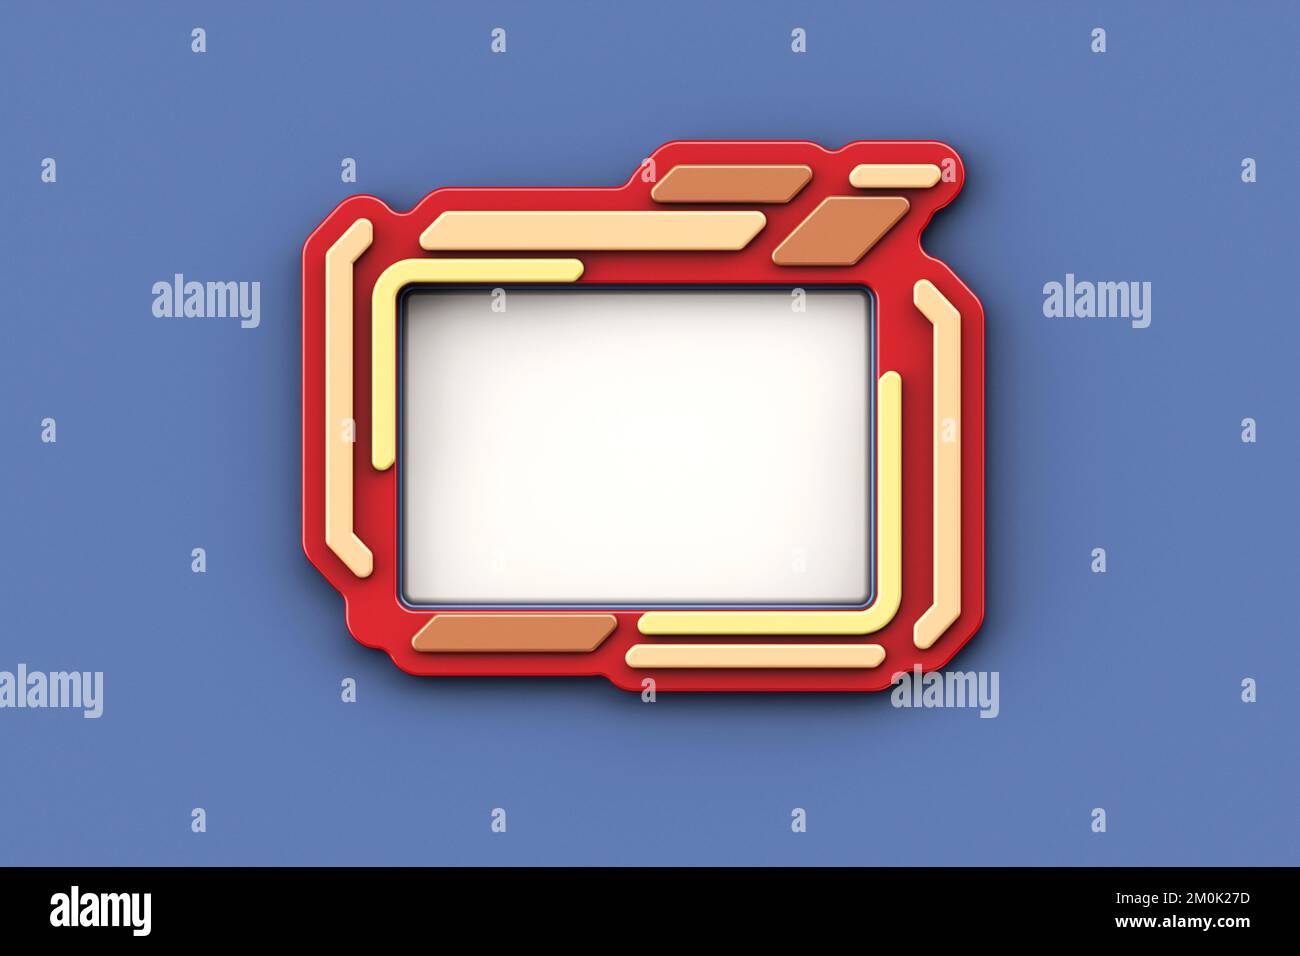 Red yellow picture frame isolated on blue background with copy space, Portable wireless video game console icons. 3d rendering. Stock Photo